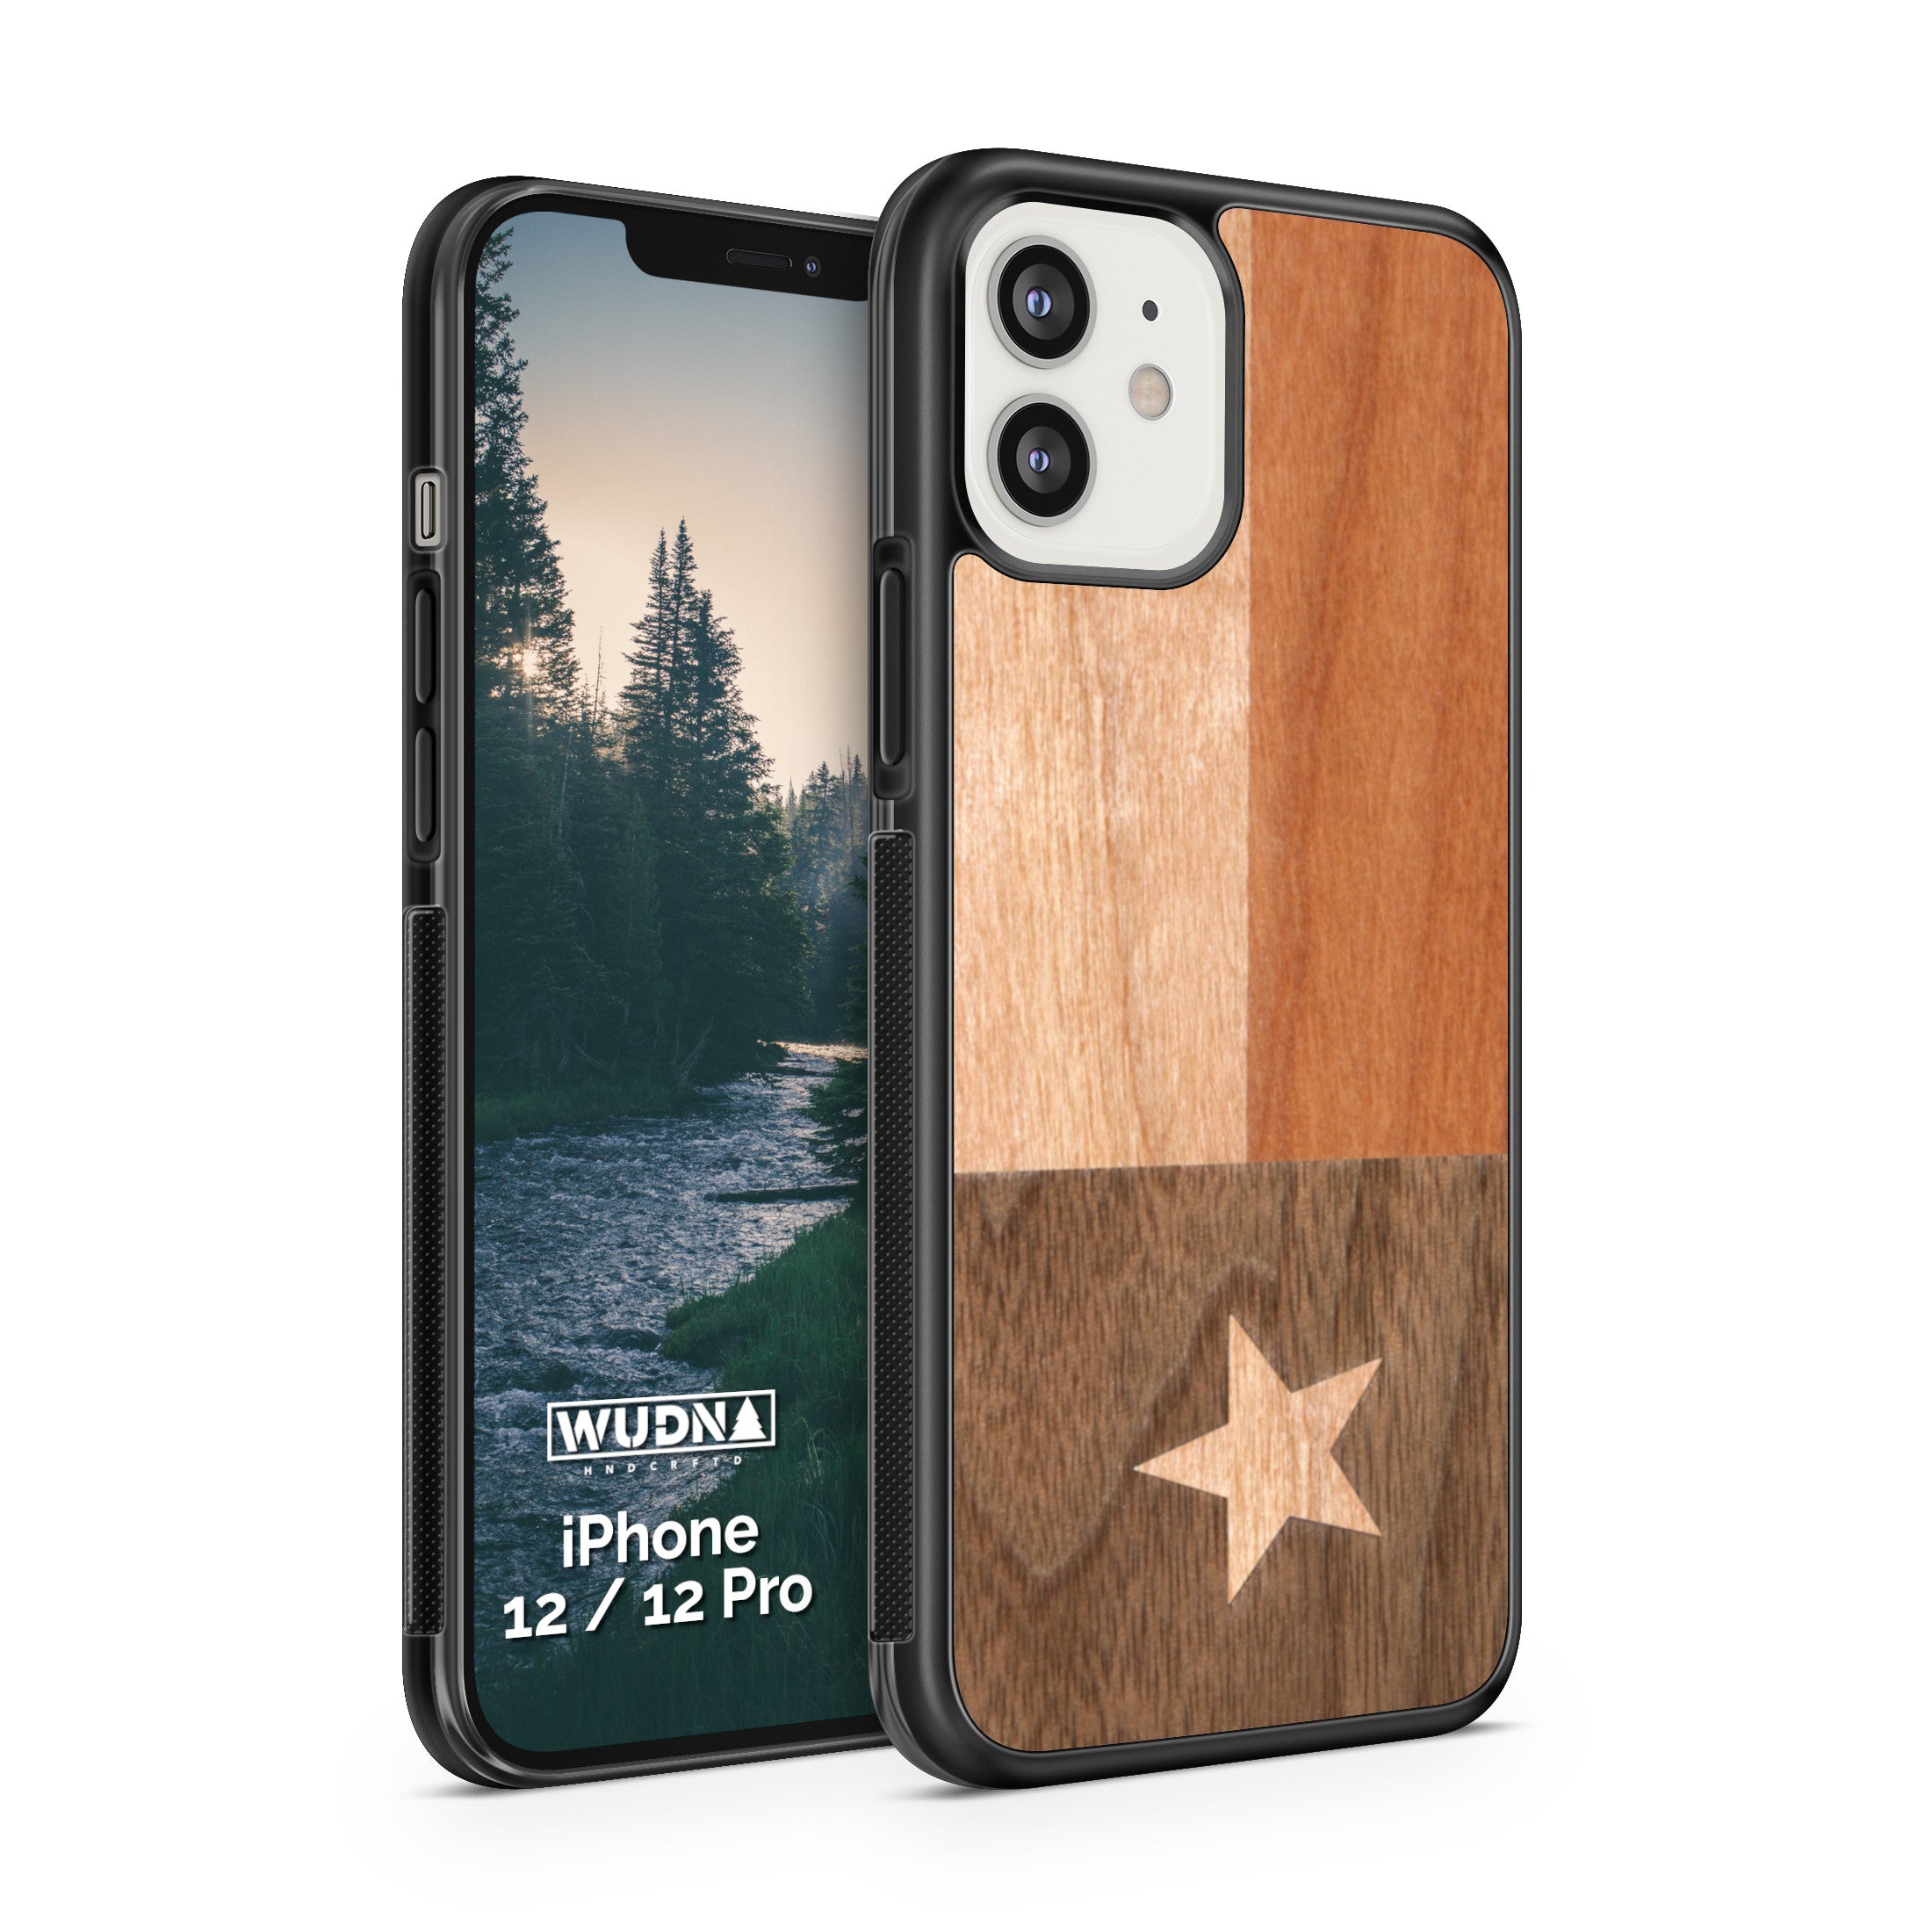 Slim Wooden iPhone Case (Texas State Flag)